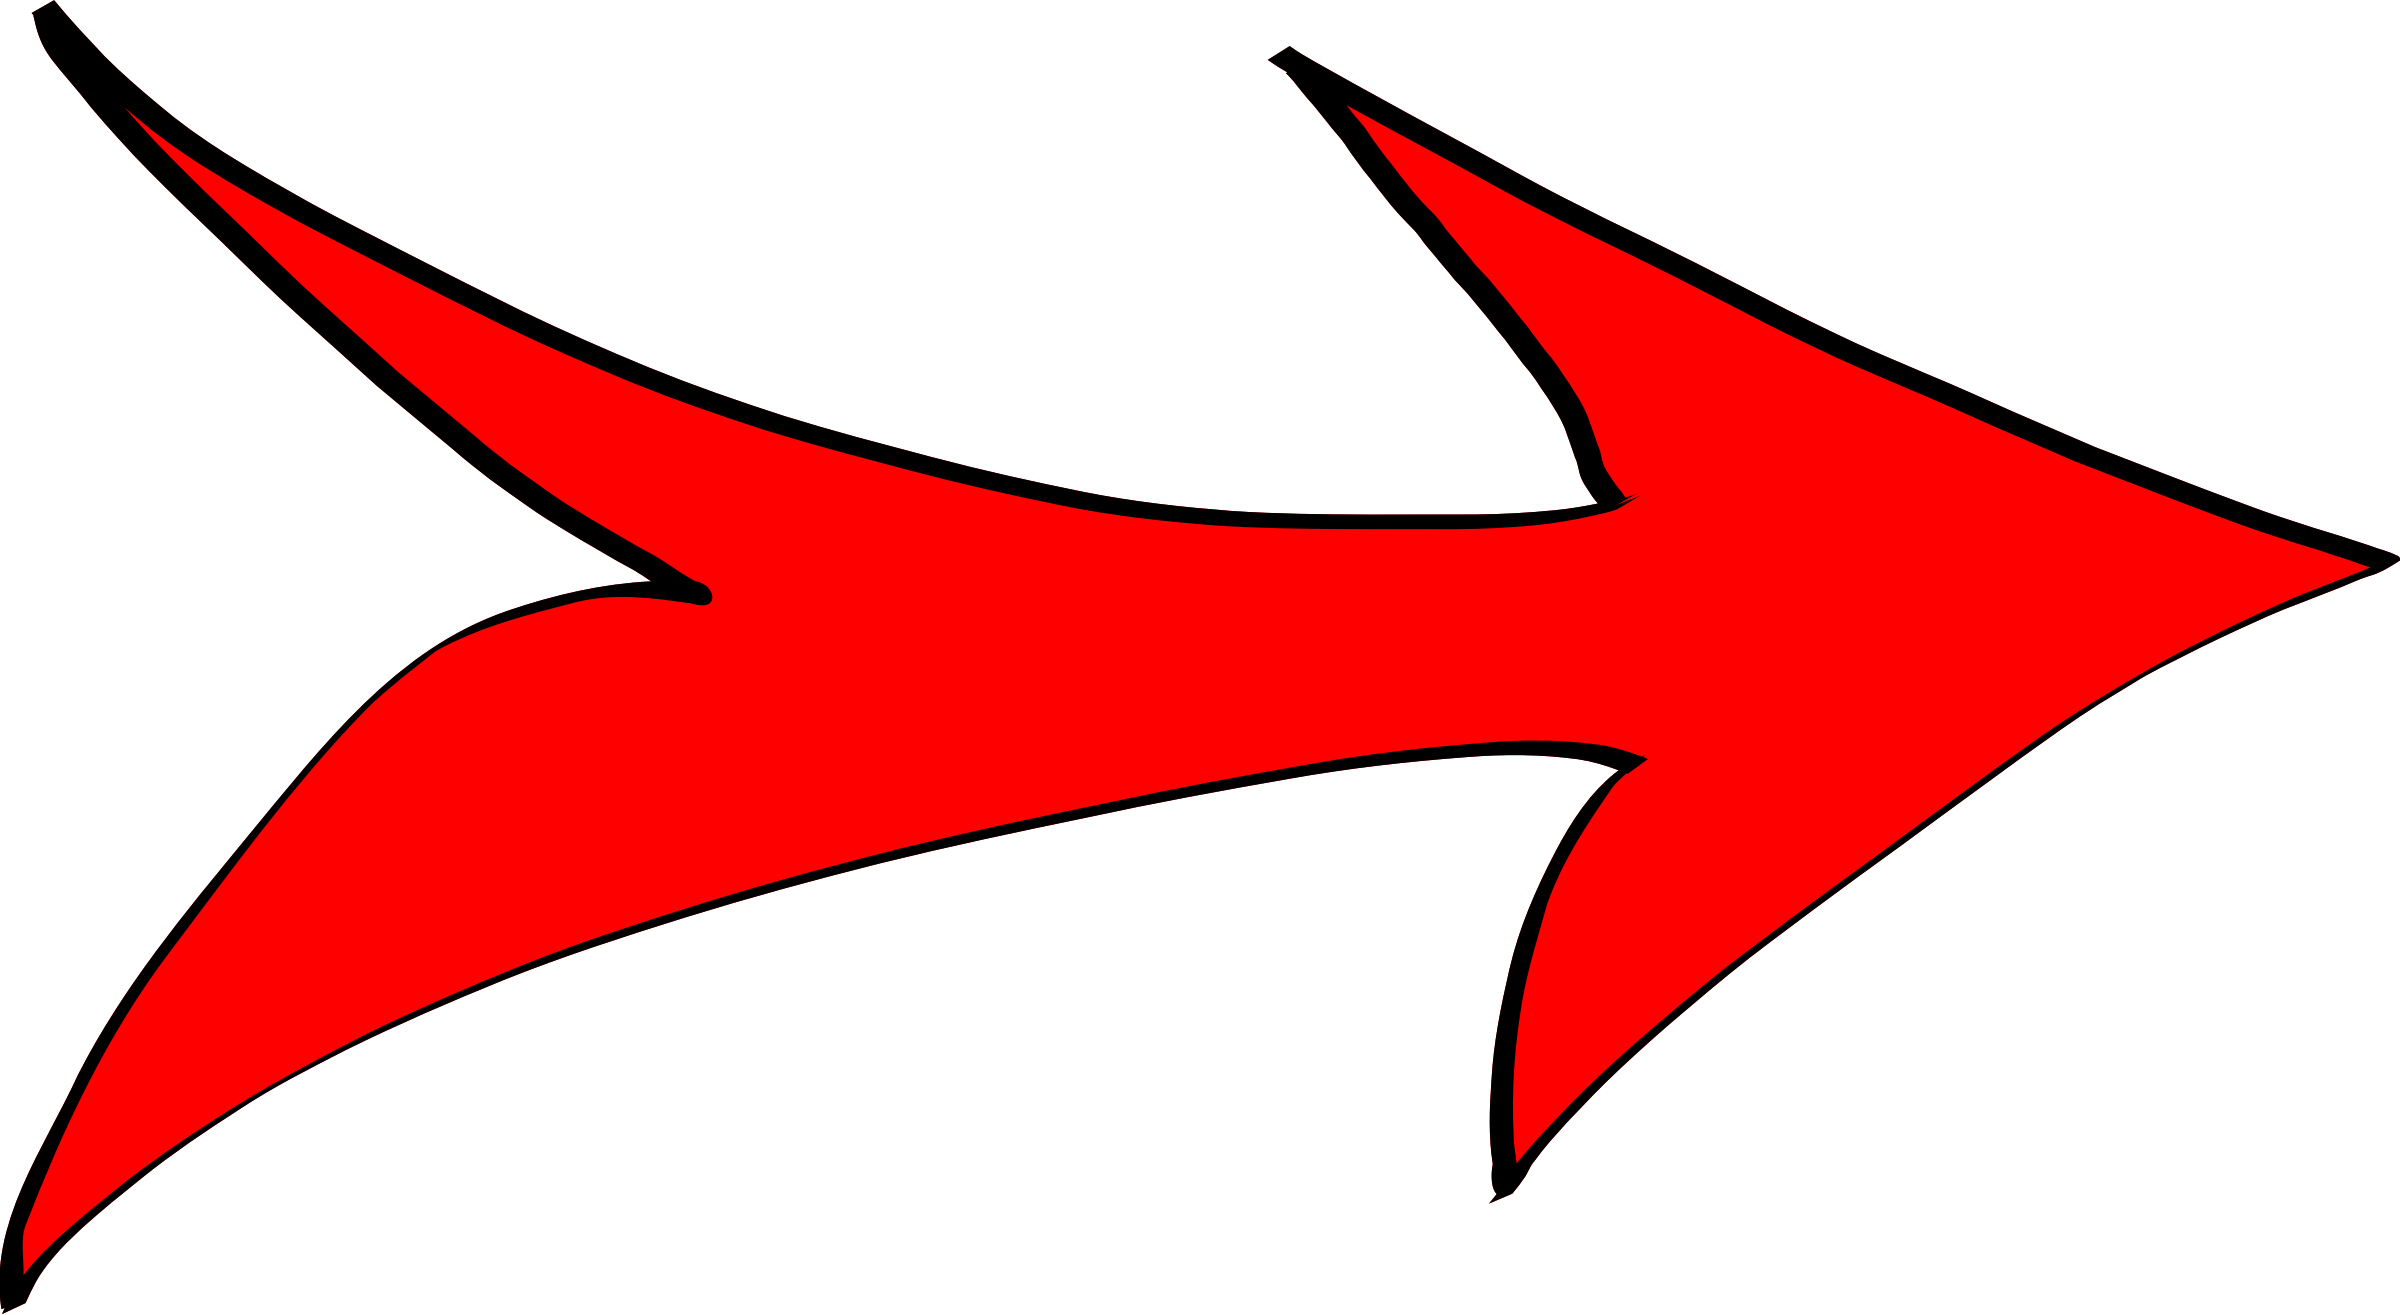 Red Arrow Vector Clipart image - Free stock photo - Public ...